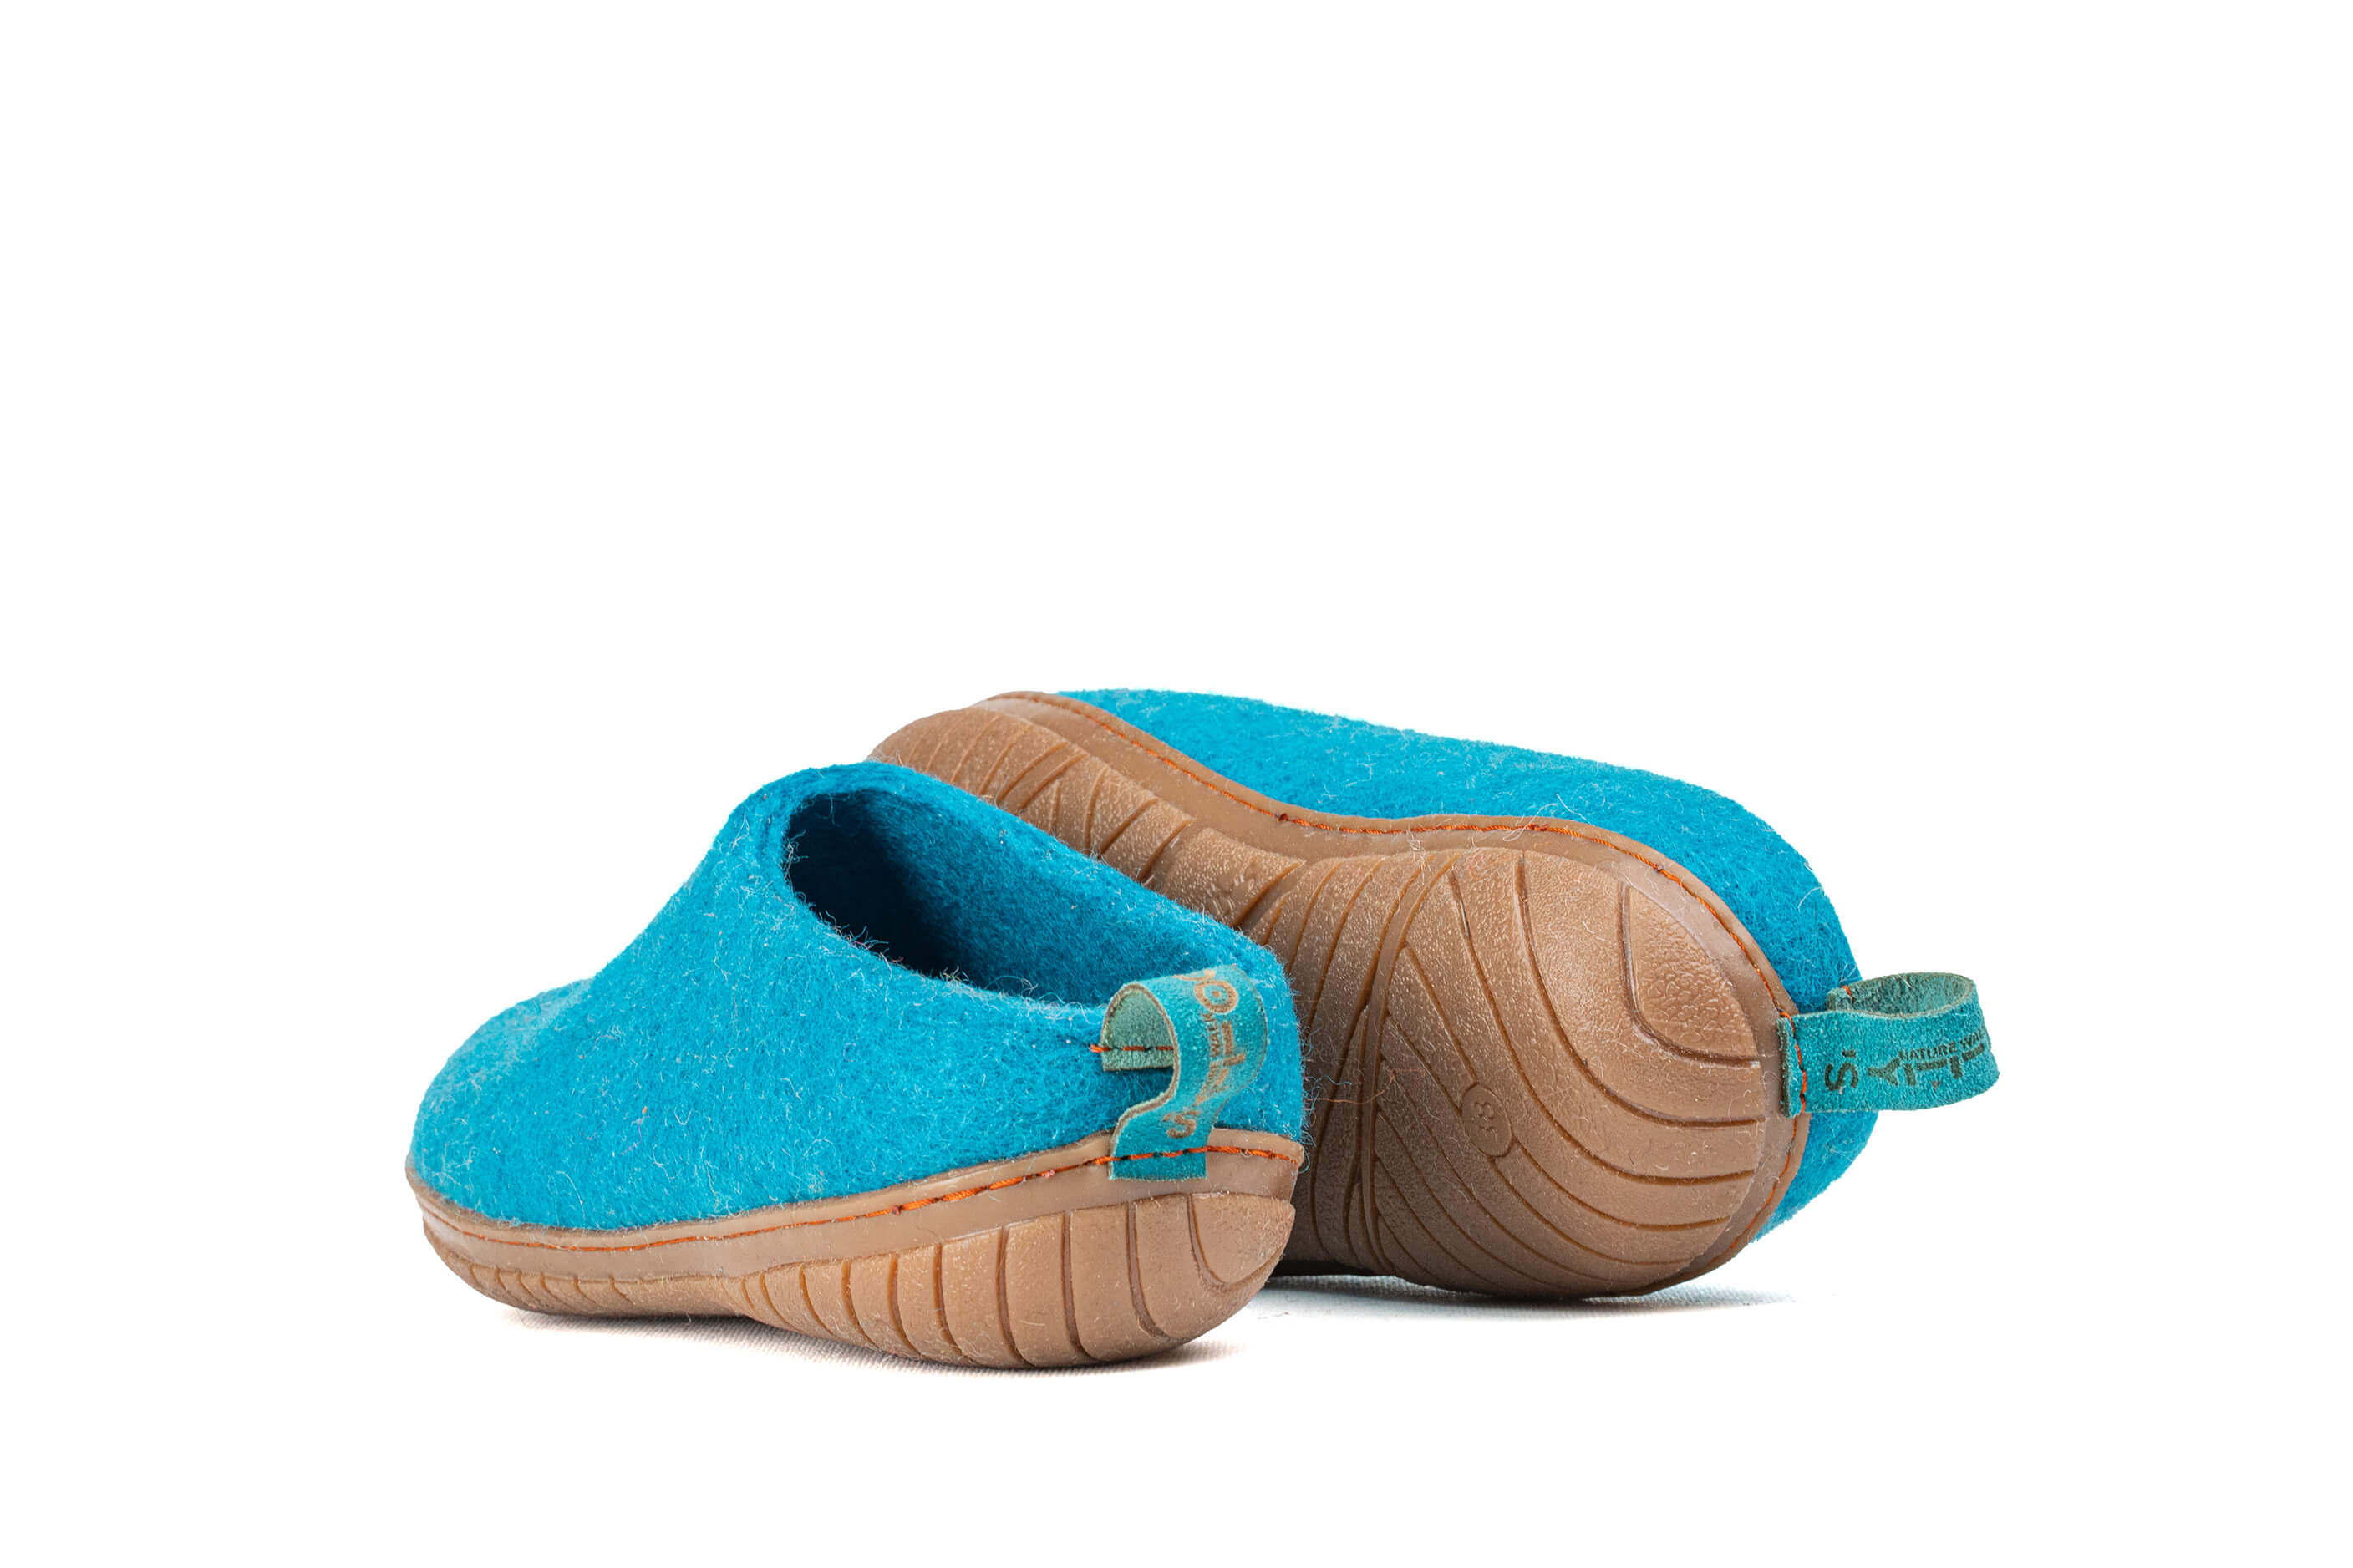 Outdoor Open Heel Slippers With Rubber Sole - Turquoise